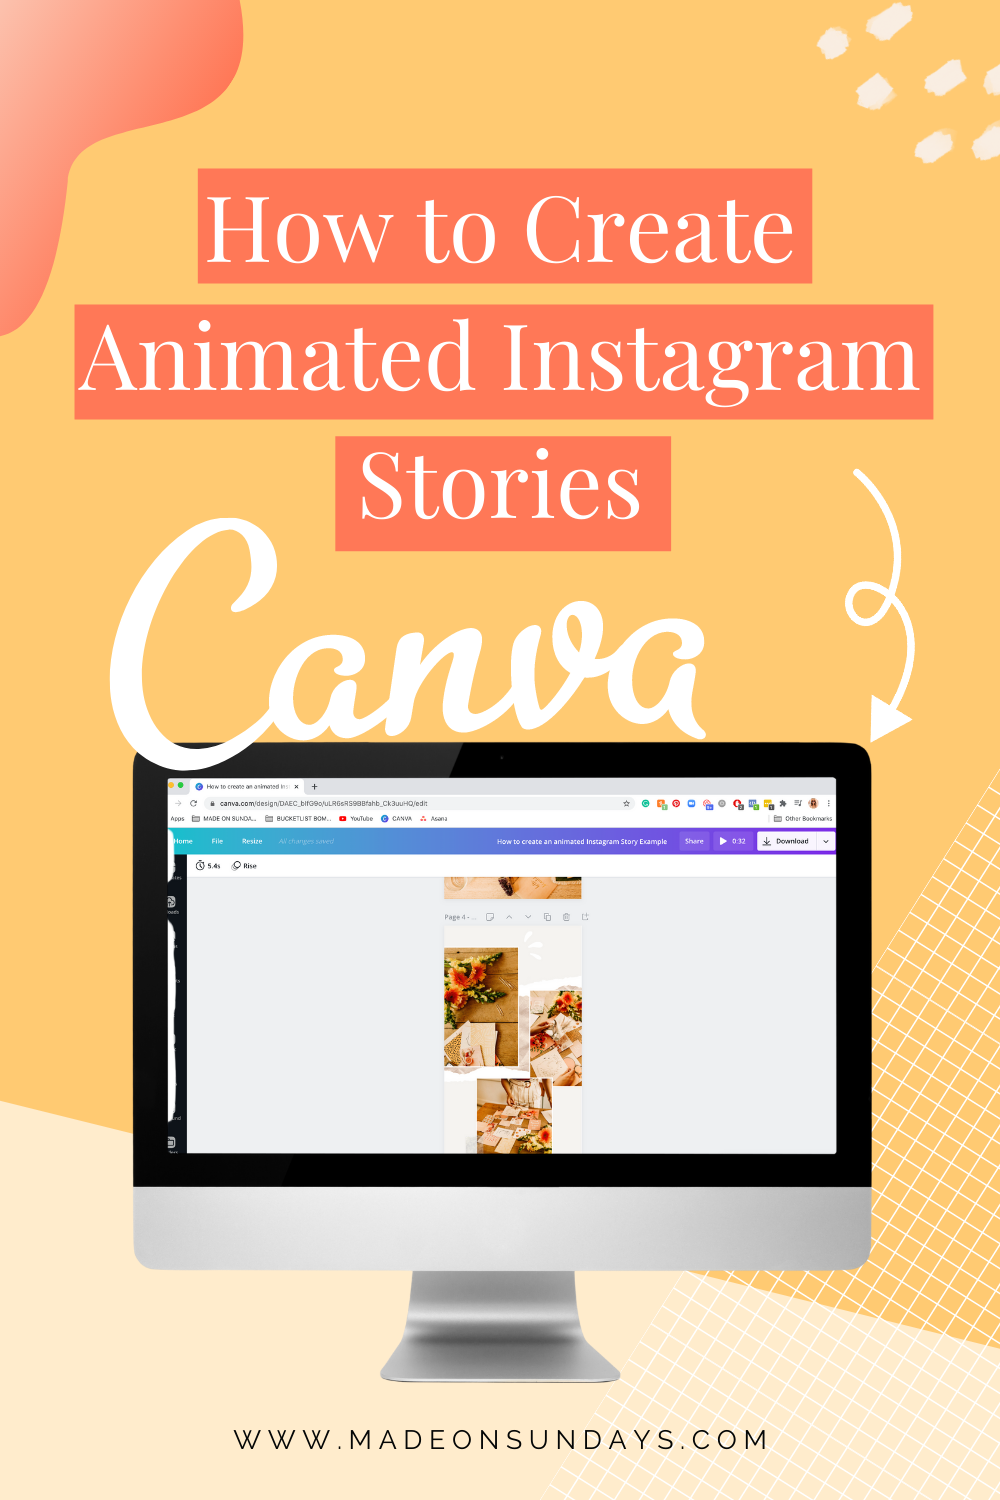 How to create Animated Instagram Stories 